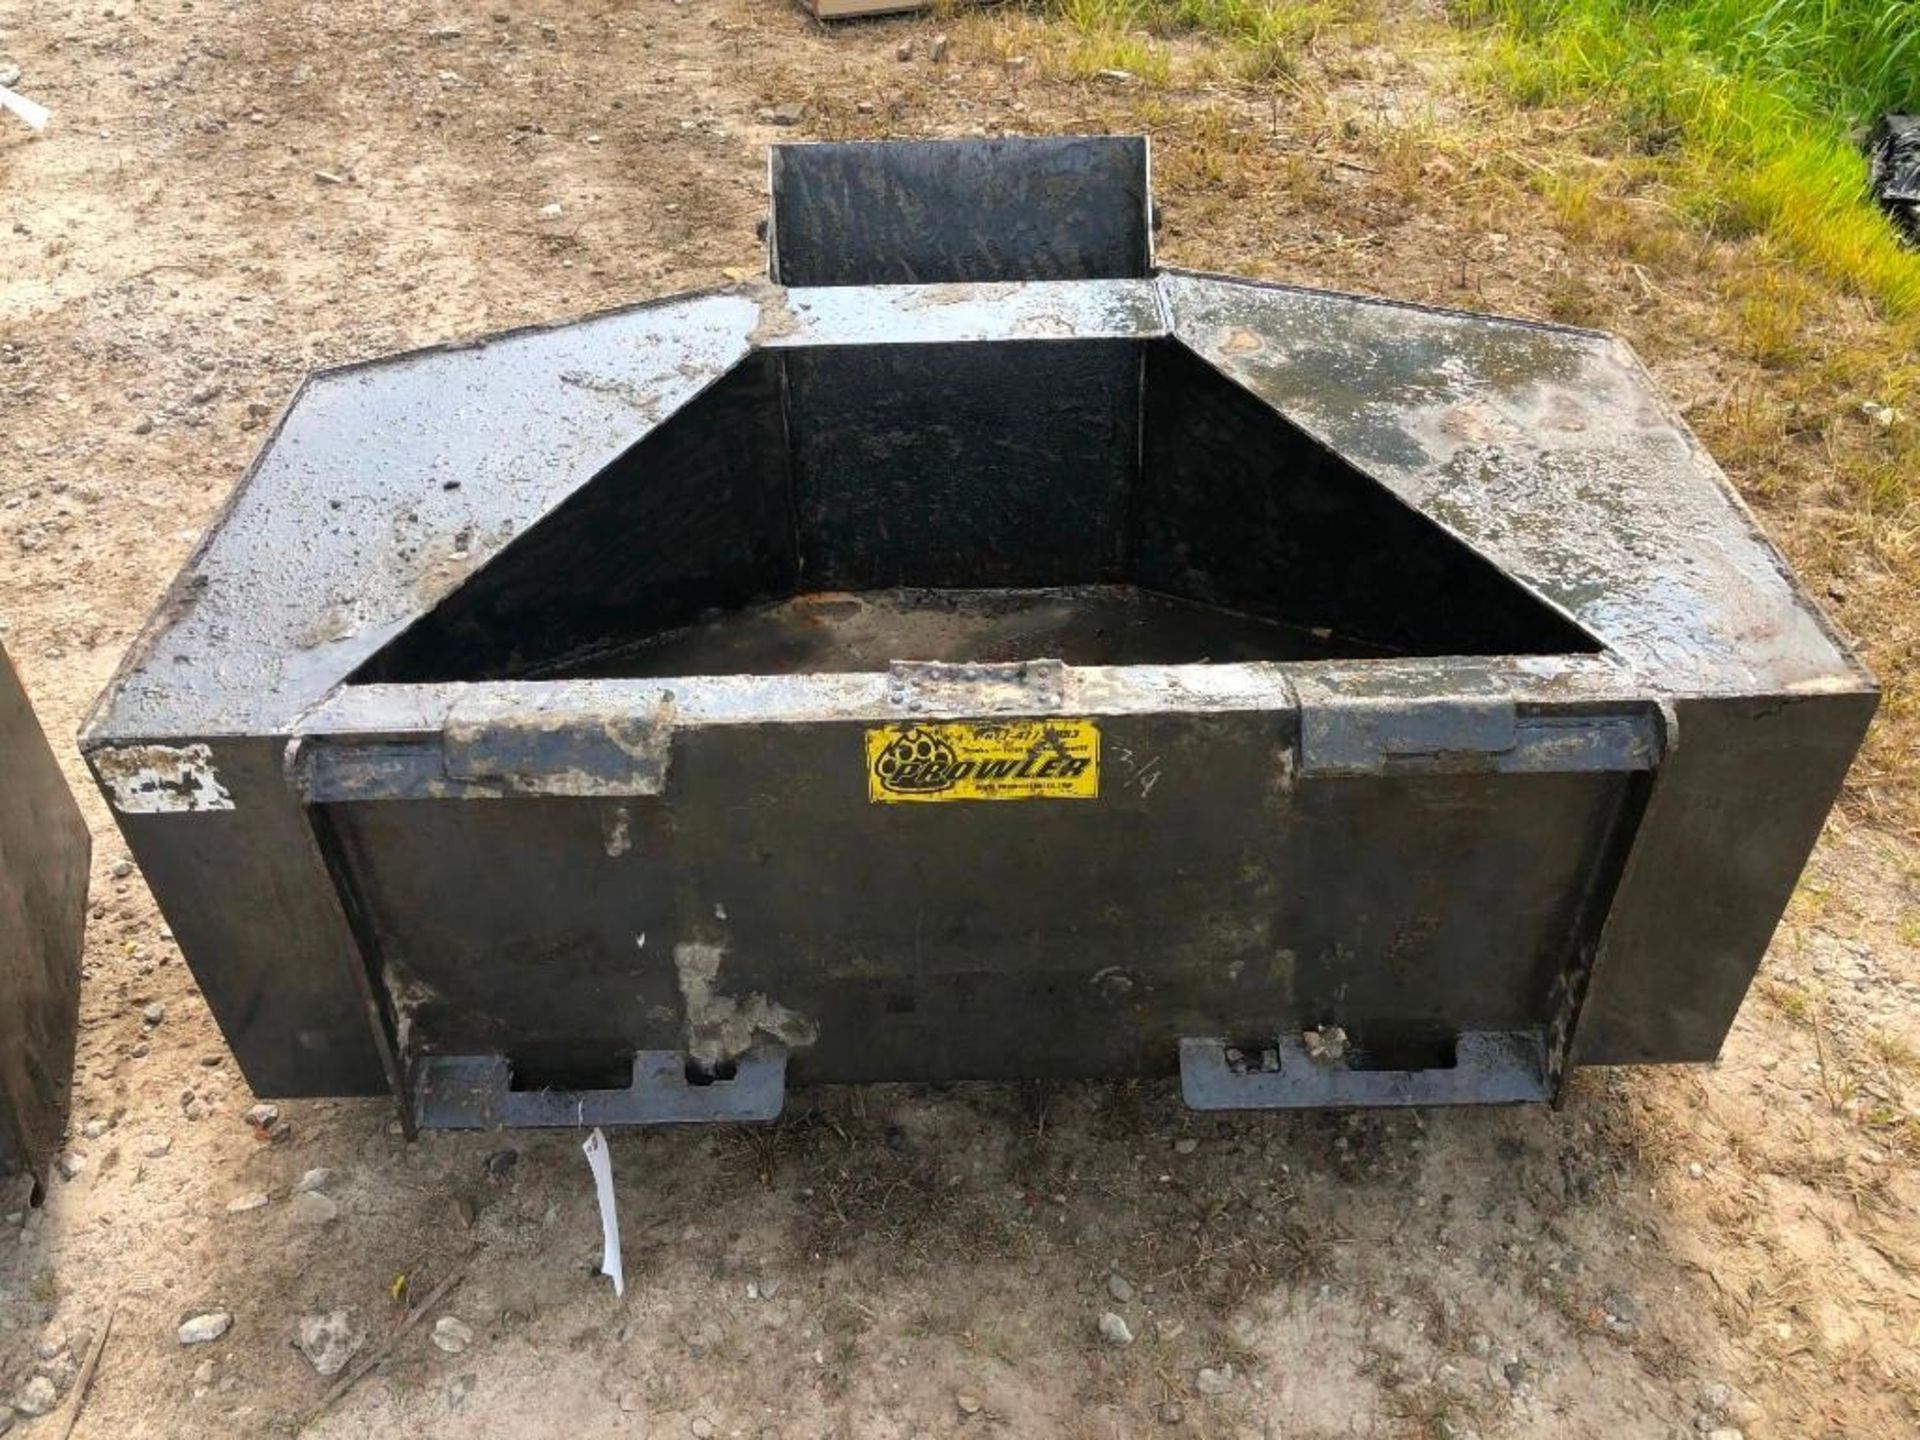 Skidloader Concrete Chute Bucket. Located at 301 E Henry Street, Mt. Pleasant, IA 52641.